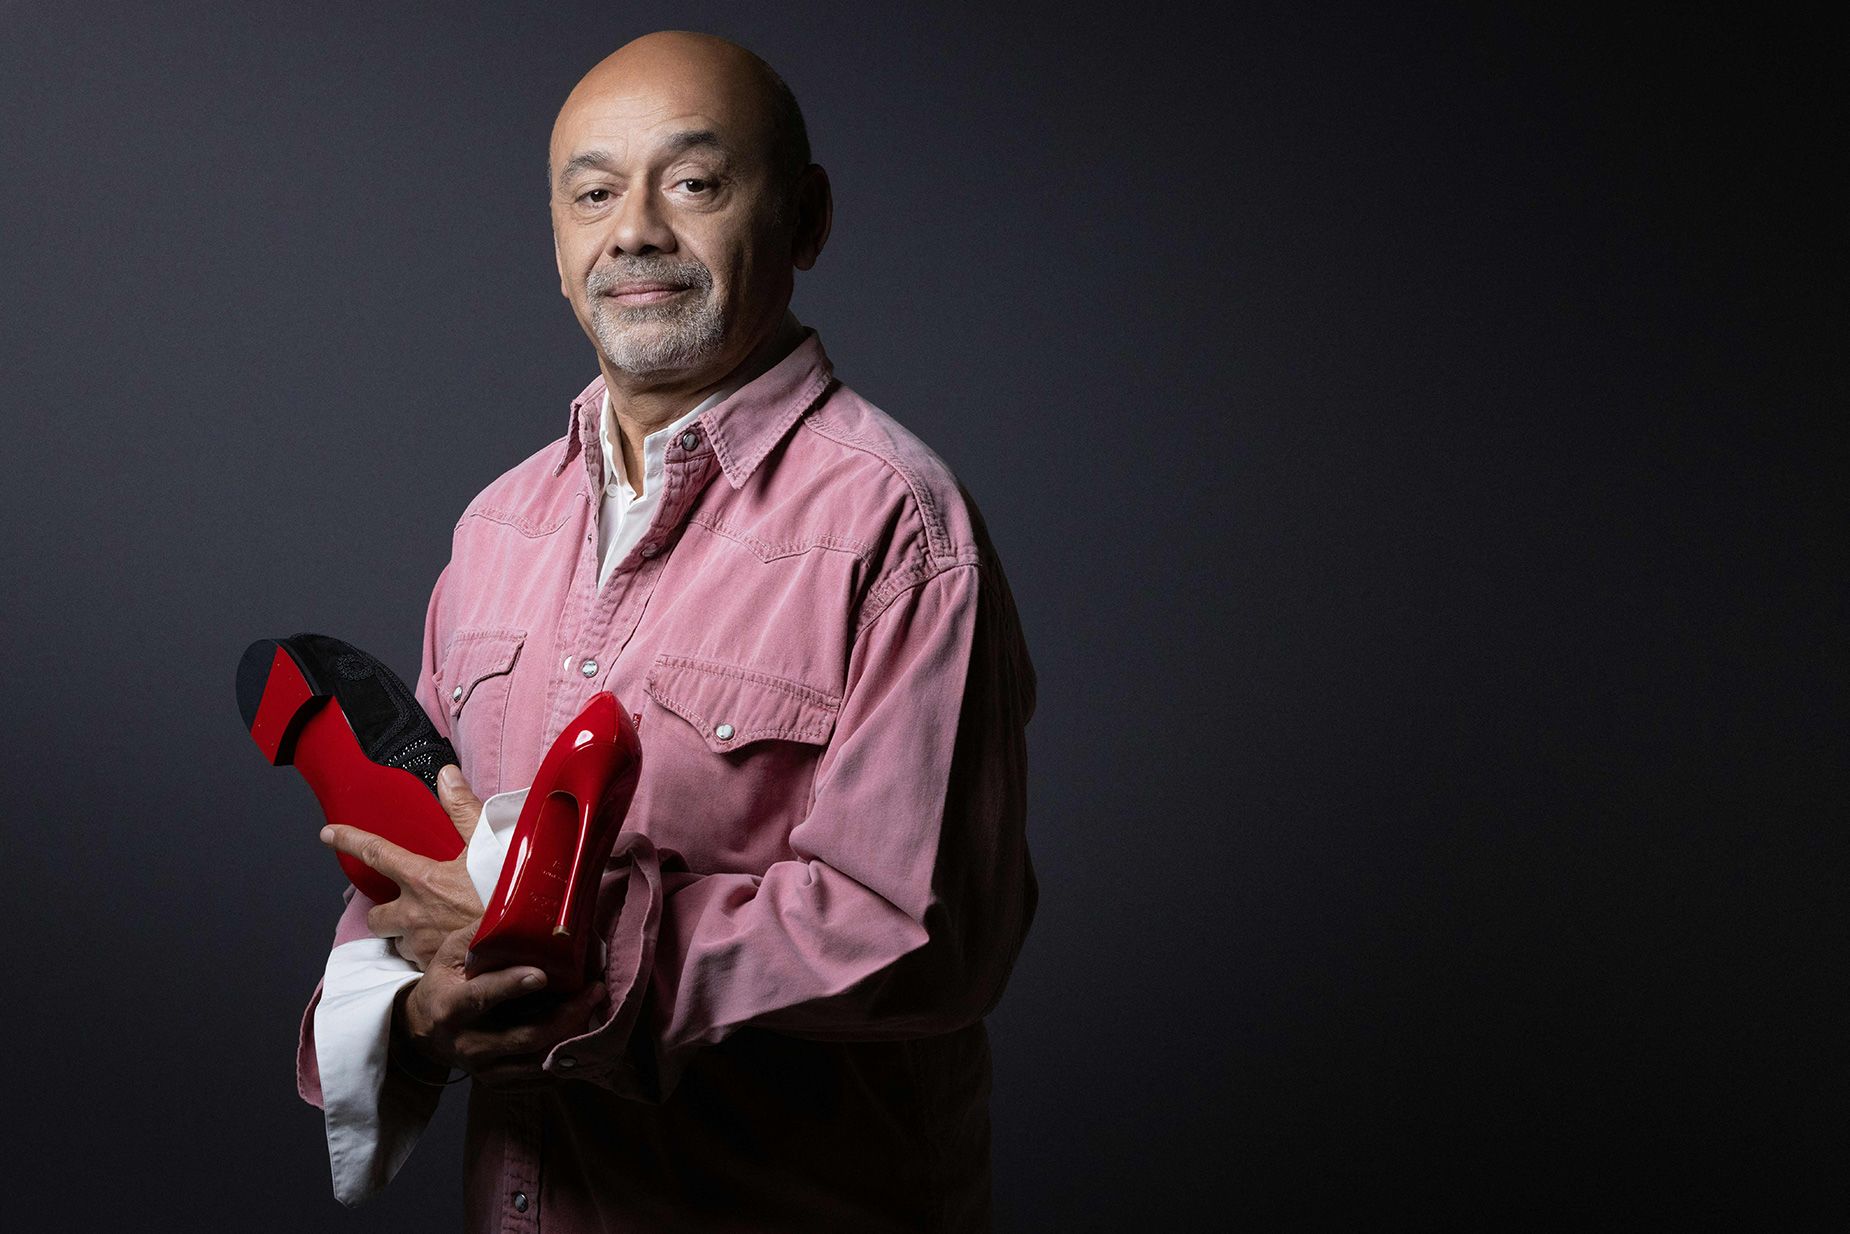 Christian Louboutin 'rules for life